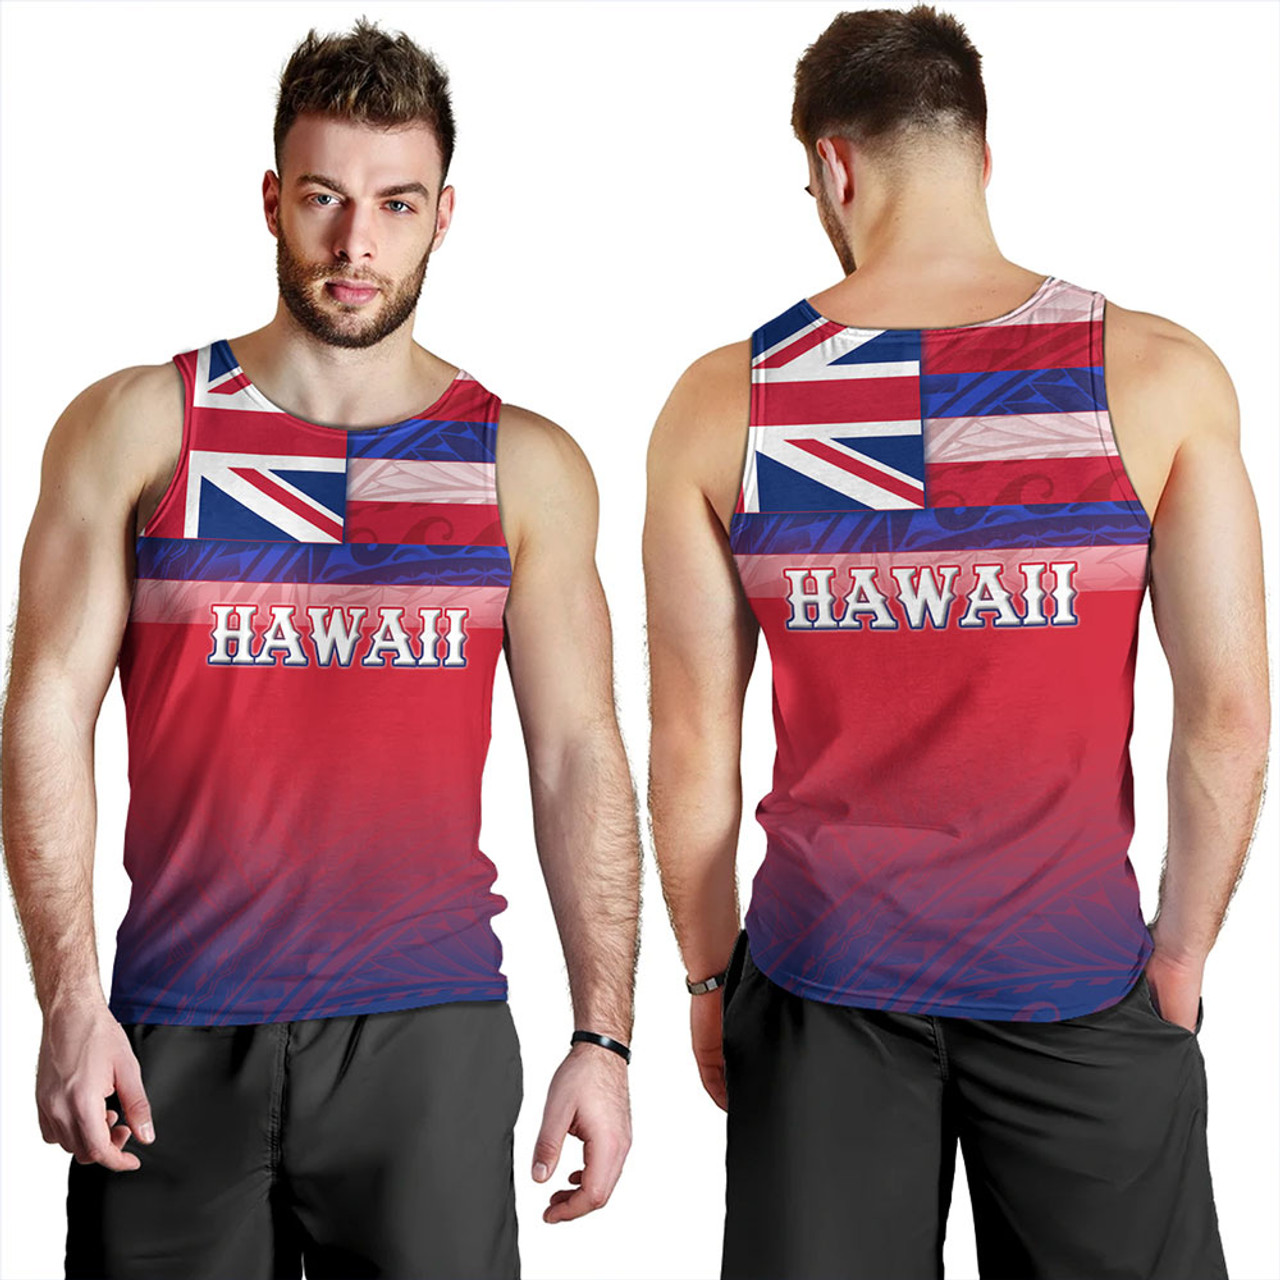 Hawaii Tank Top - Hawaii Flag Color With Traditional Patterns